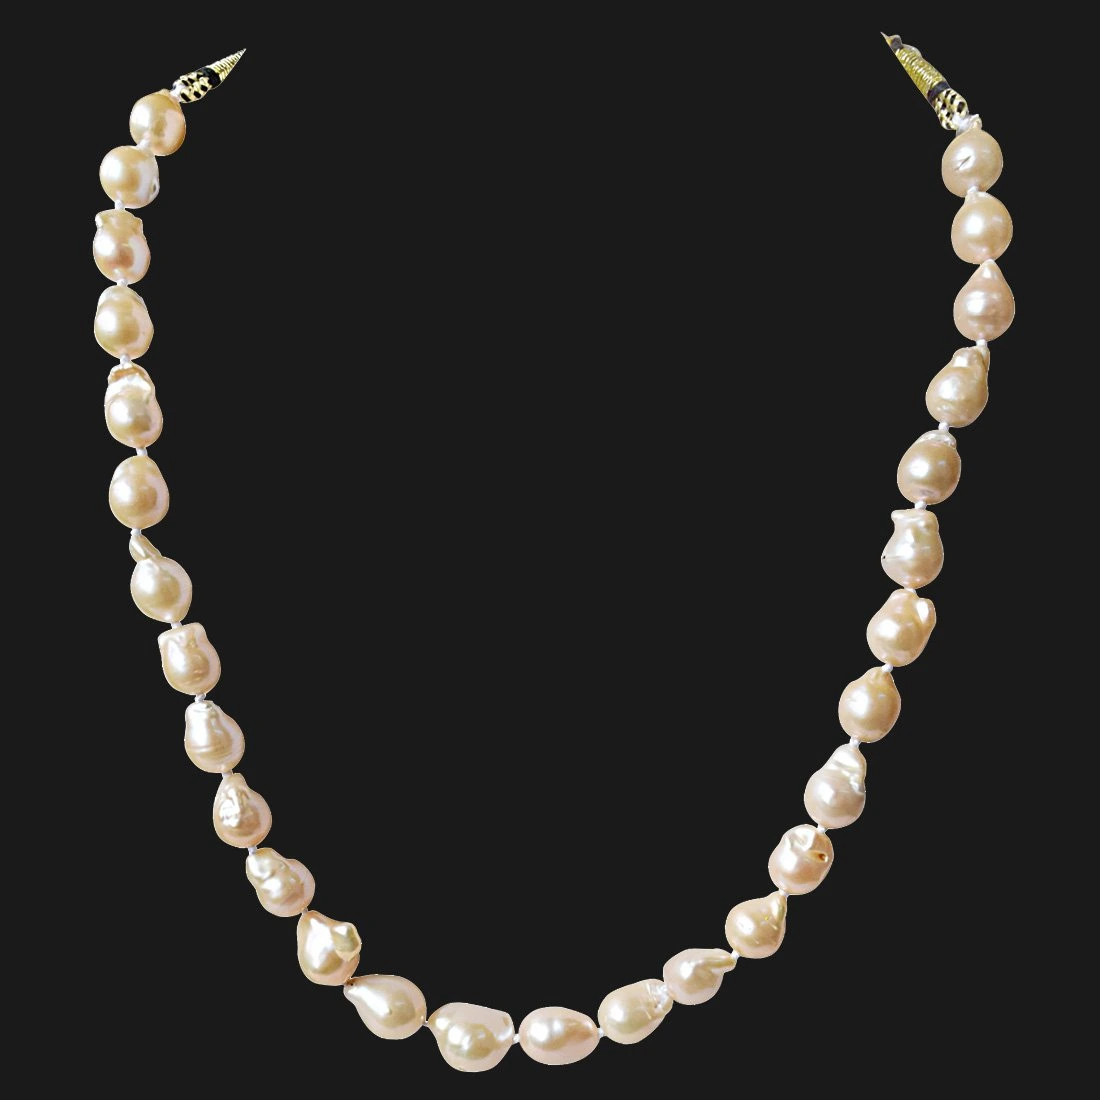 Peach Real Baroque Pearl Necklace for Women with Knots (SN917)